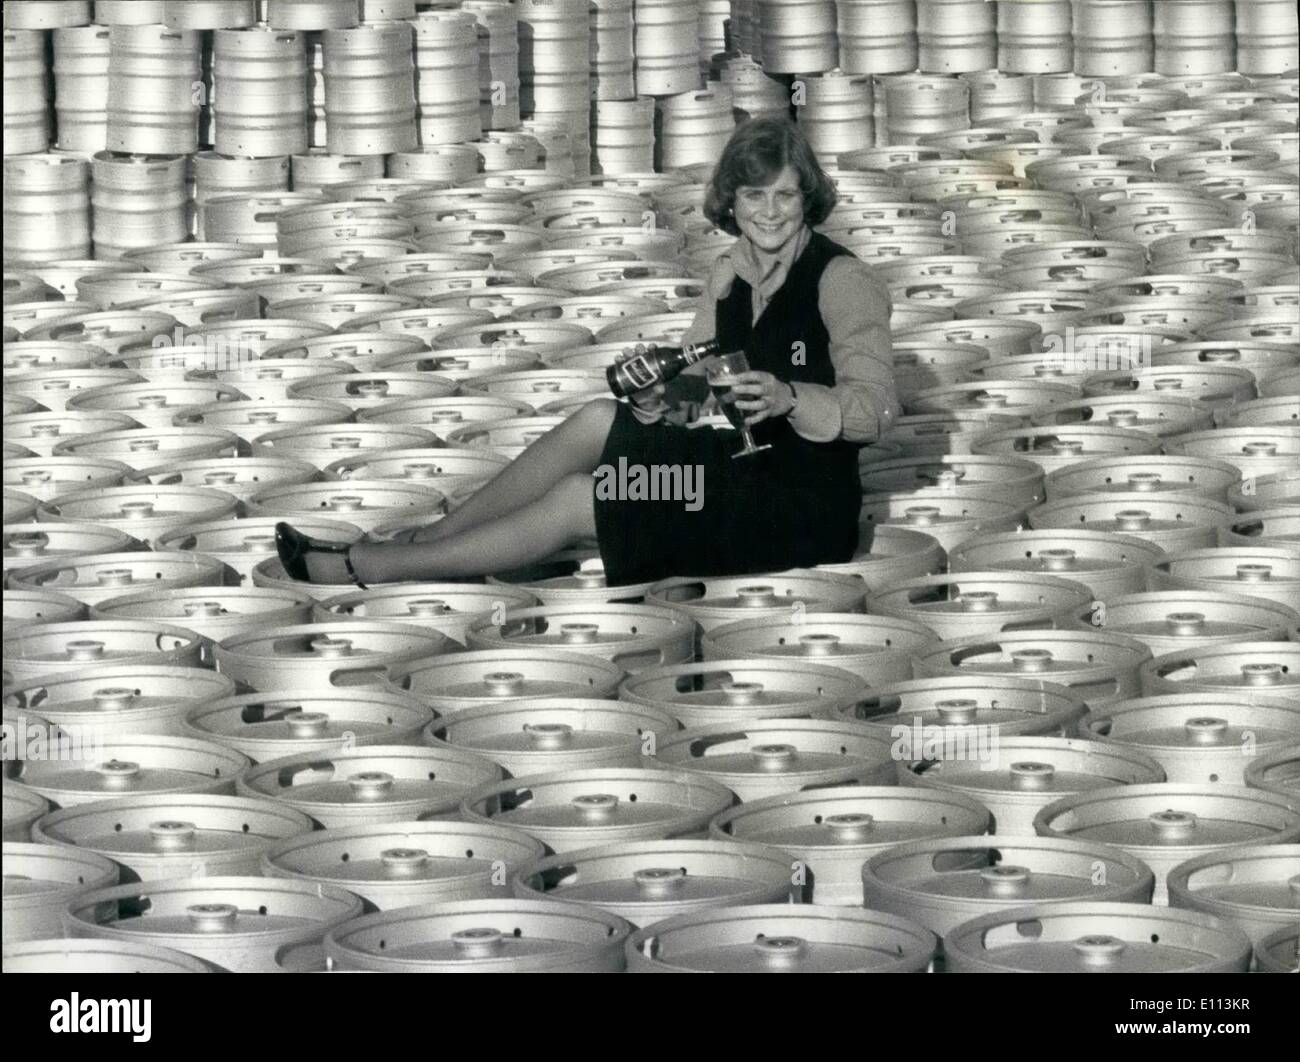 Oct. 10, 1975 - Pretty Jane's taste-budding profession is beer tasting but she hates the stuff: Jane Harland, 22, must be the envy of millions of beer drinkers throughout Britain, for her job is testing beer to make sure that the ale which eventually is sold in pubs is just right. But there is a snag-Jane hates the stuff - she drinks plenty of tea. Jane got the job because Bass Charrington, noticed heracute sense of taste when she used to complain if the tea tasted odd. she has to identify the odd one of three beer served in black glasses and give her comments Stock Photo